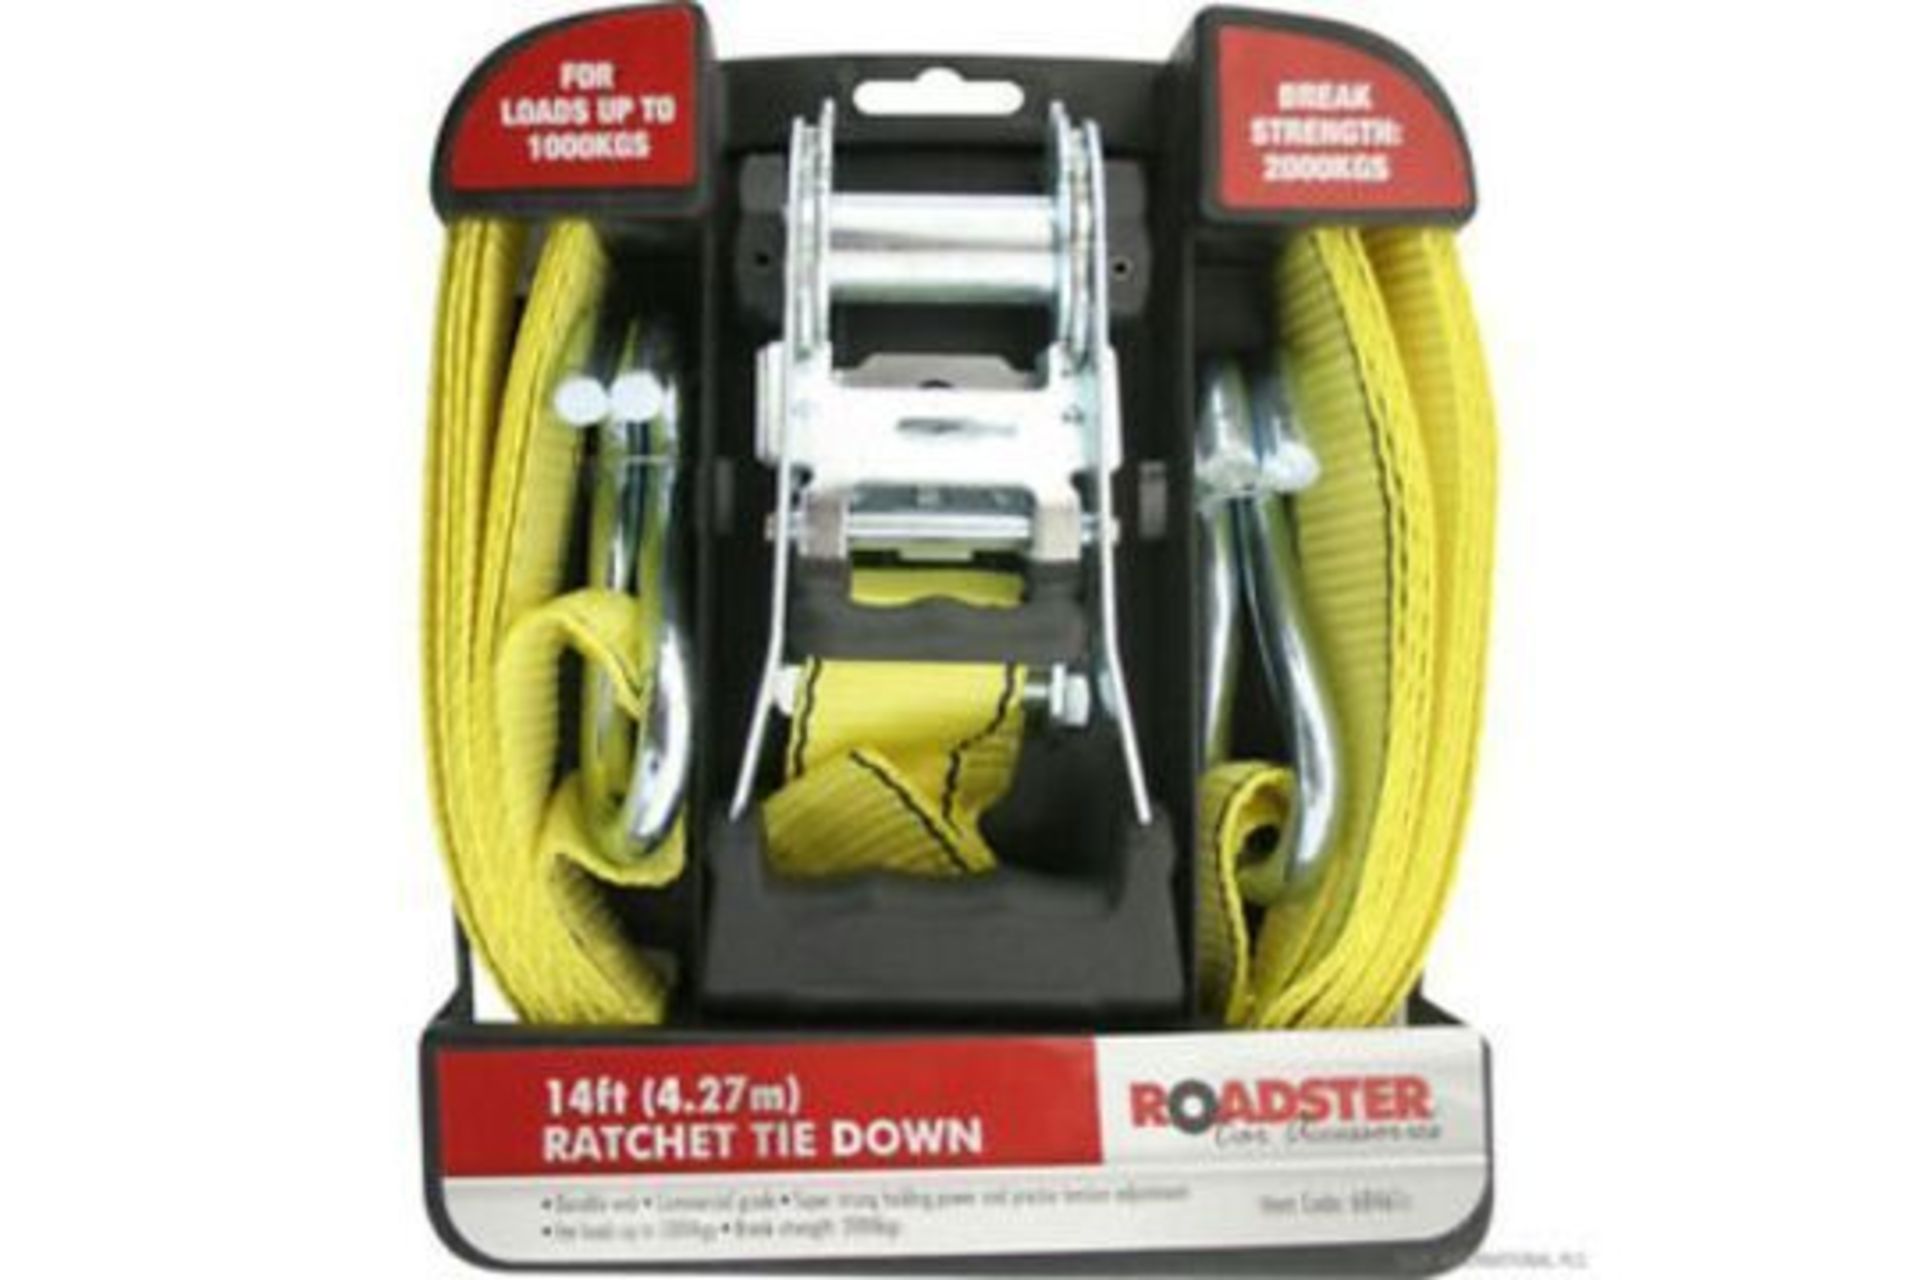 New Roadster 2 Pack Of 14ft Ratchet Tie Down Up To 1000kg